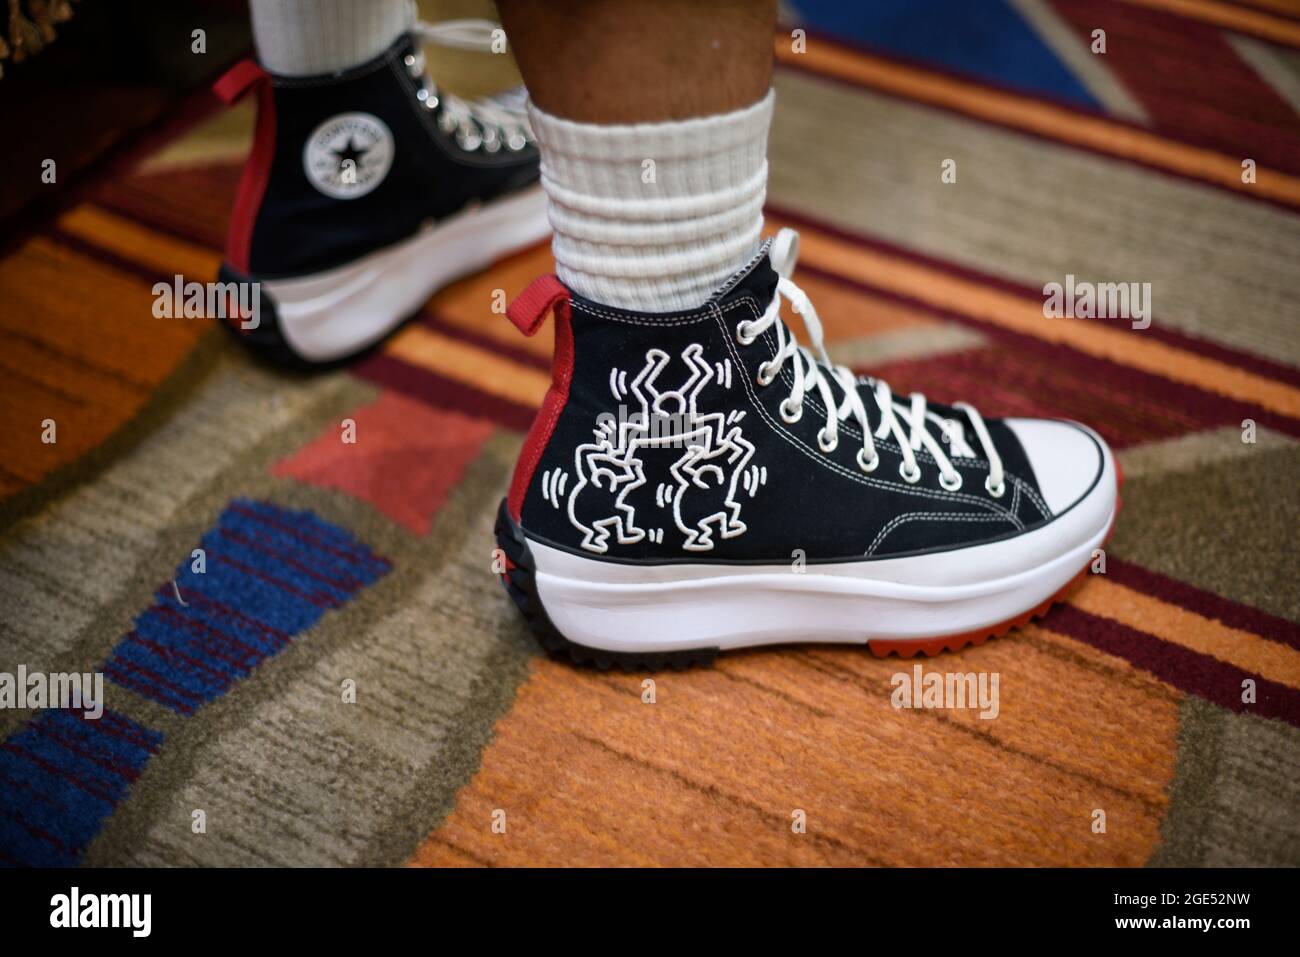 A young man wears a pair of Converse high top sneakers embellished with drawings by artist Keith Haring. Stock Photo